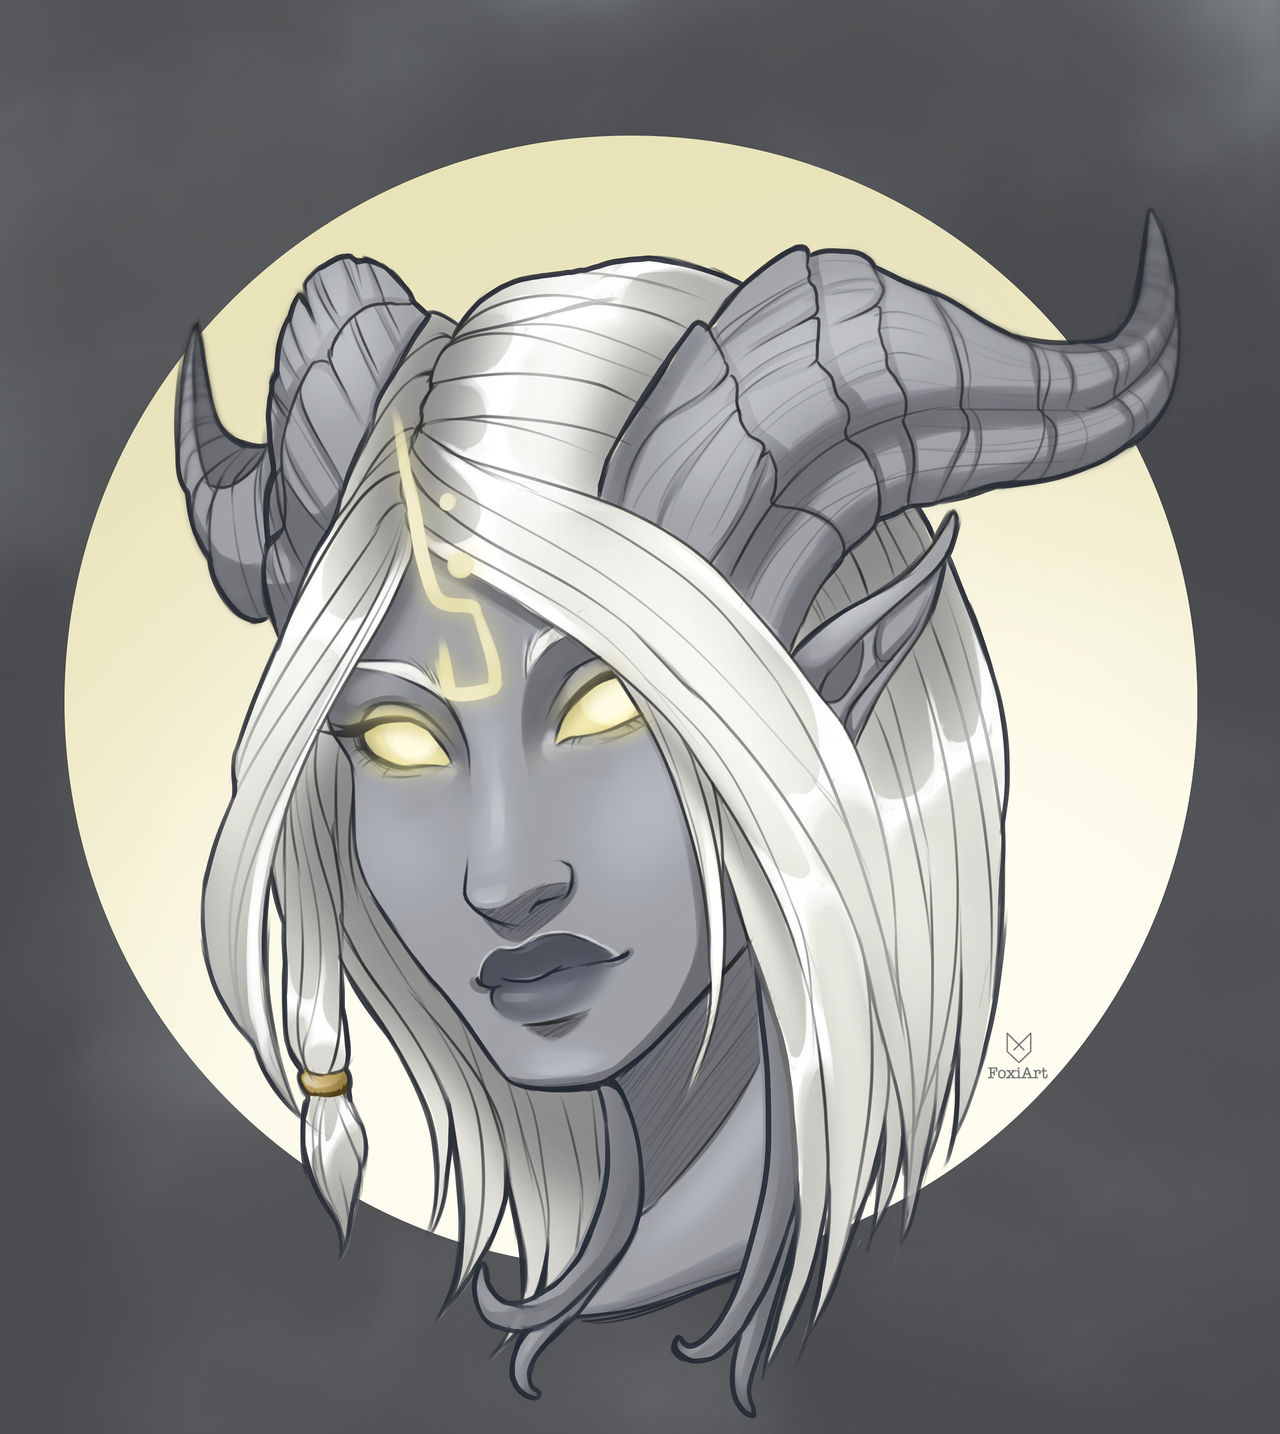 Art Giveaway: Ari by Foxiart on DeviantArt